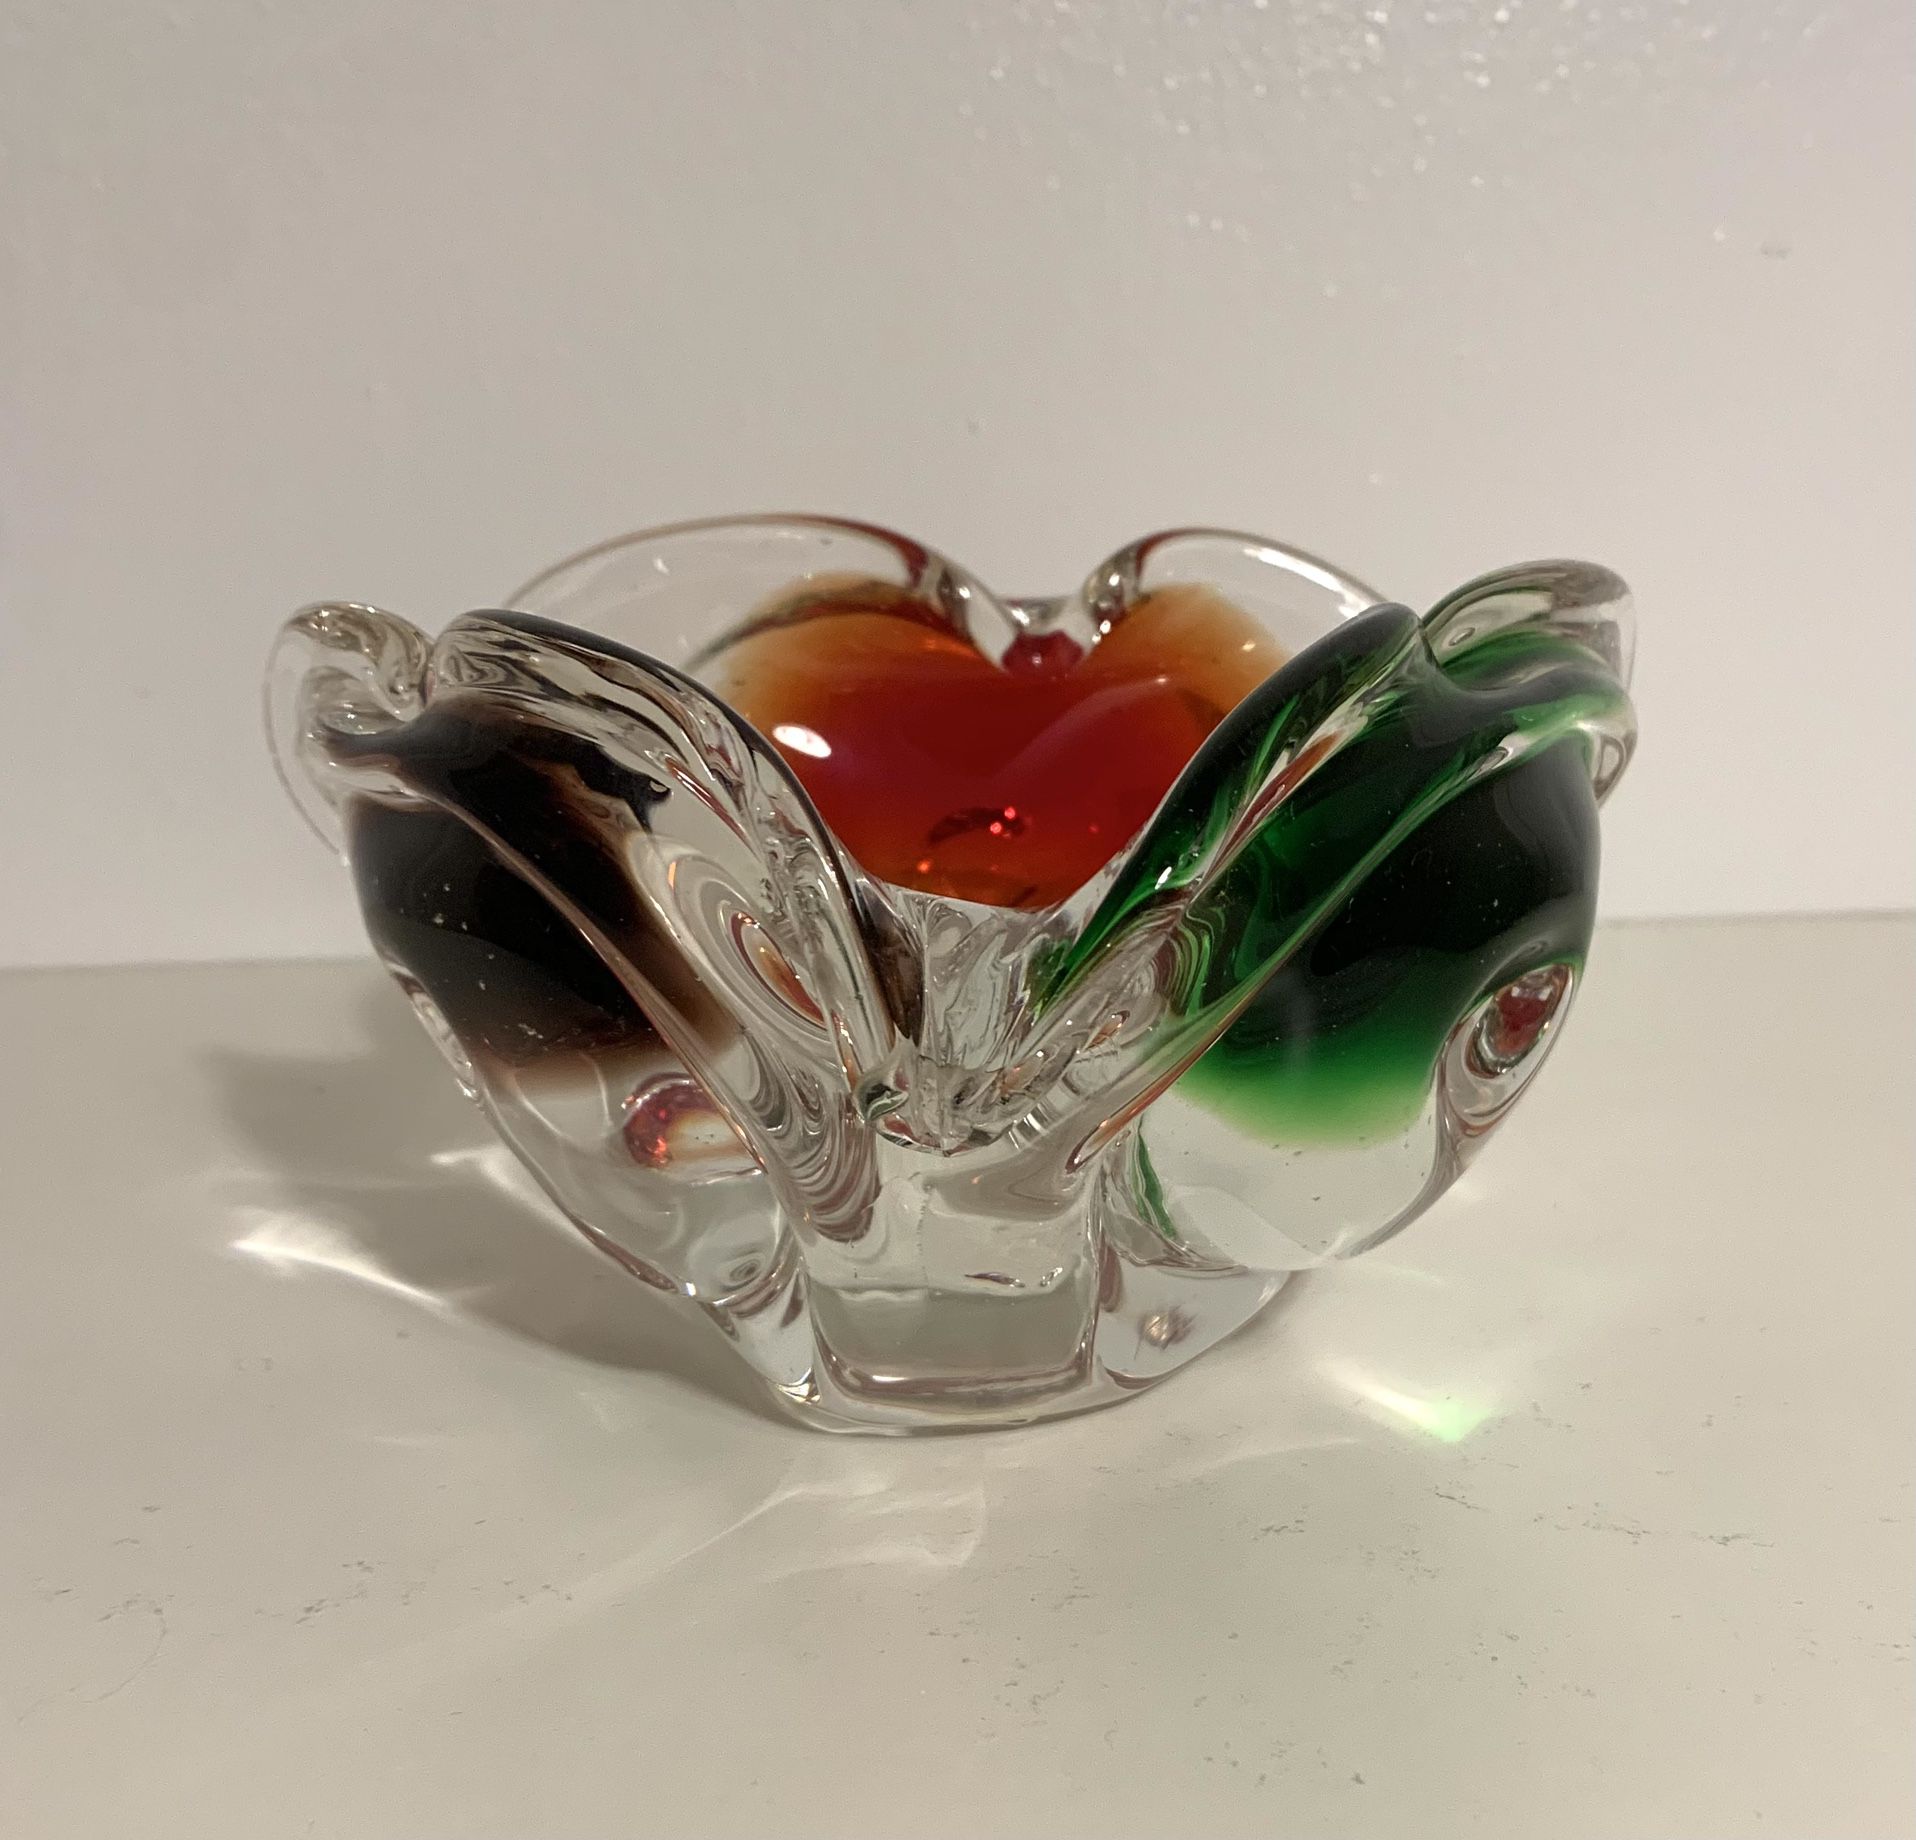 Red Green Purple Glass Bowl